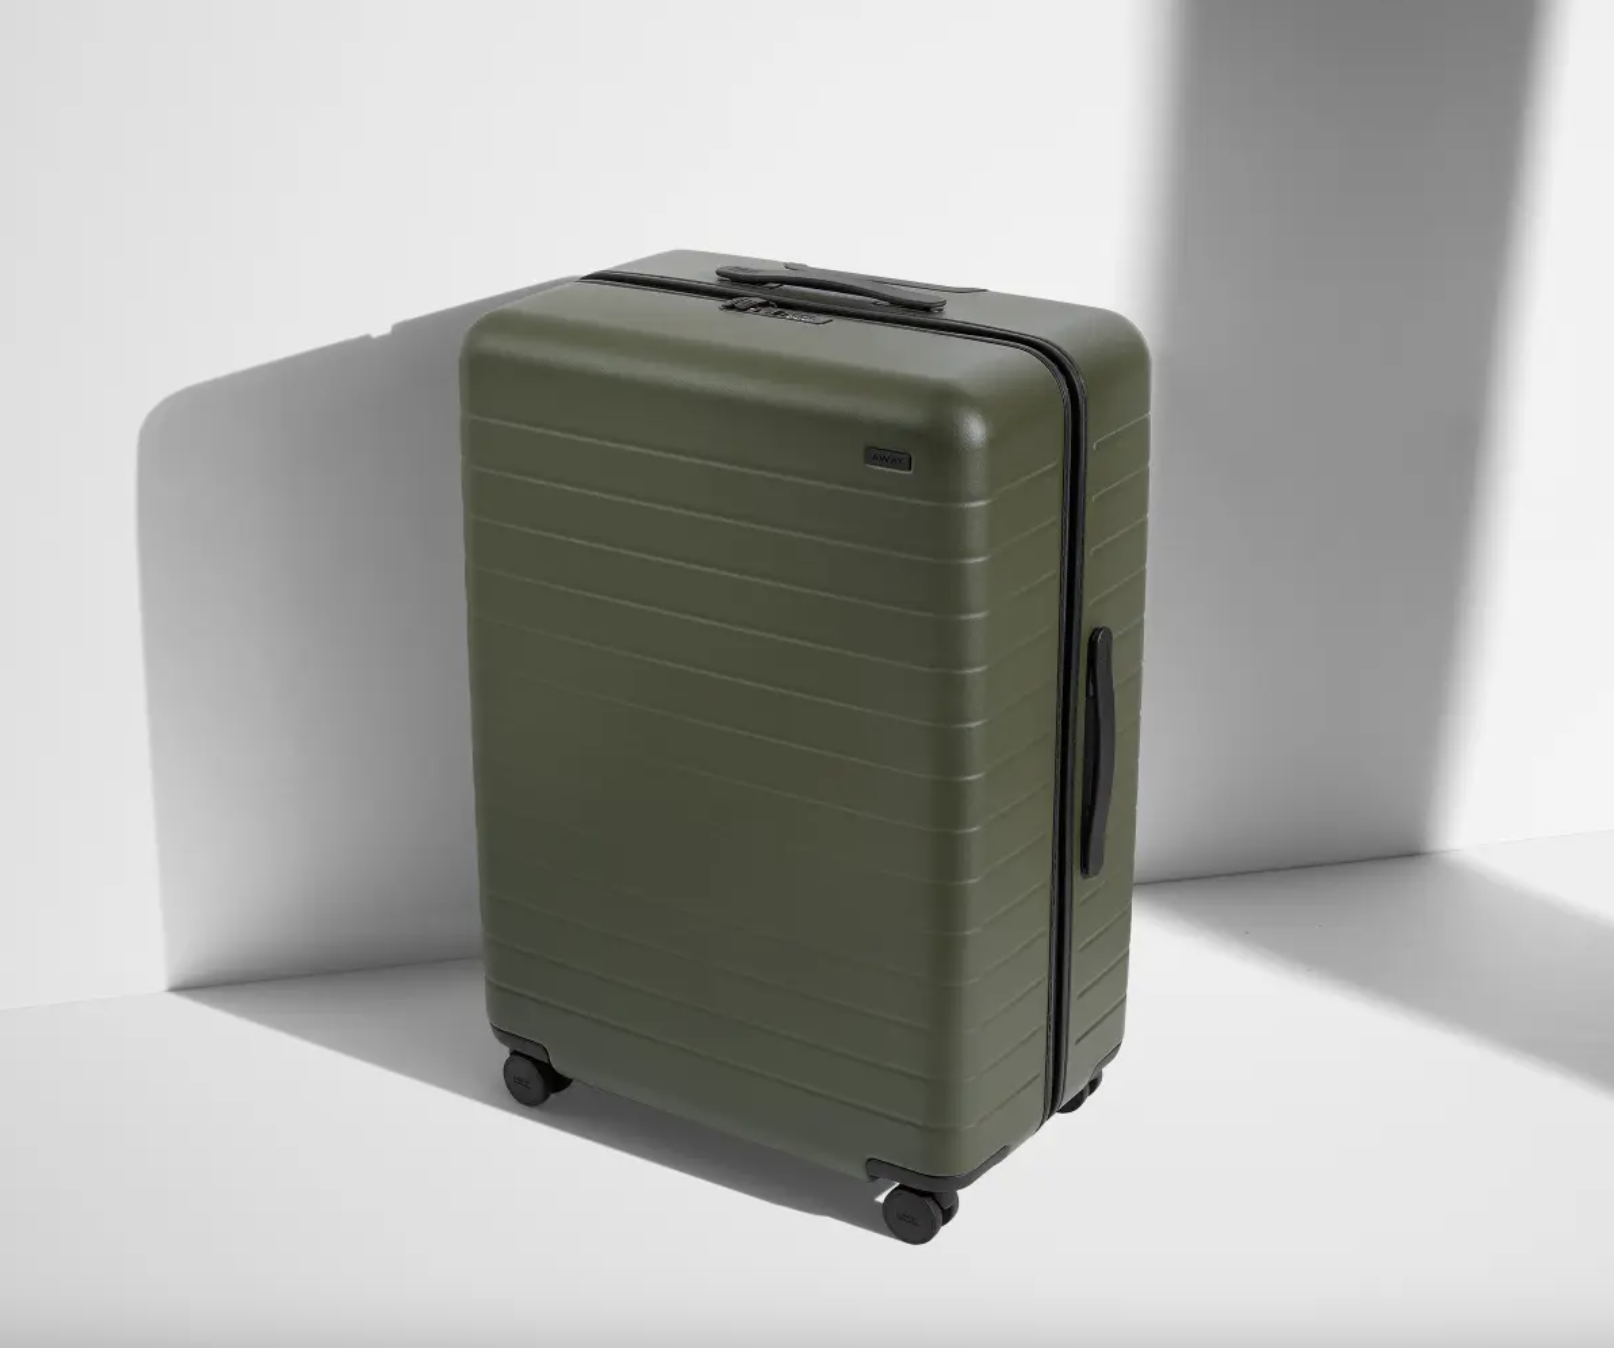 <p><strong>$395.00</strong></p><p><a href="https://go.redirectingat.com?id=74968X1553576&url=https%3A%2F%2Fwww.awaytravel.com%2Fsuitcases%2Flarge&sref=https%3A%2F%2Fwww.townandcountrymag.com%2Fstyle%2Fmens-fashion%2Fg45575330%2Fbest-mens-travel-bags%2F">Shop Now</a></p><p>If you must check a piece of luggage, consider this Away option which boasts a sturdy polycarbonate shell and can fit two-weeks-worth of outfits. Customers also claim Away has top-notch customer service that can assist with any issues you might face. </p><p><strong>One reviewer writes: </strong>"Love this luggage, it’s beautiful, it’s practical and efficient and it holds up to the wear and tear of traveling so well! Highly recommend."</p><p><strong>Material: </strong>100% Polycarbonate Shell</p><p><strong>Dimensions: </strong>29" x 20.5" x 12.5"</p>